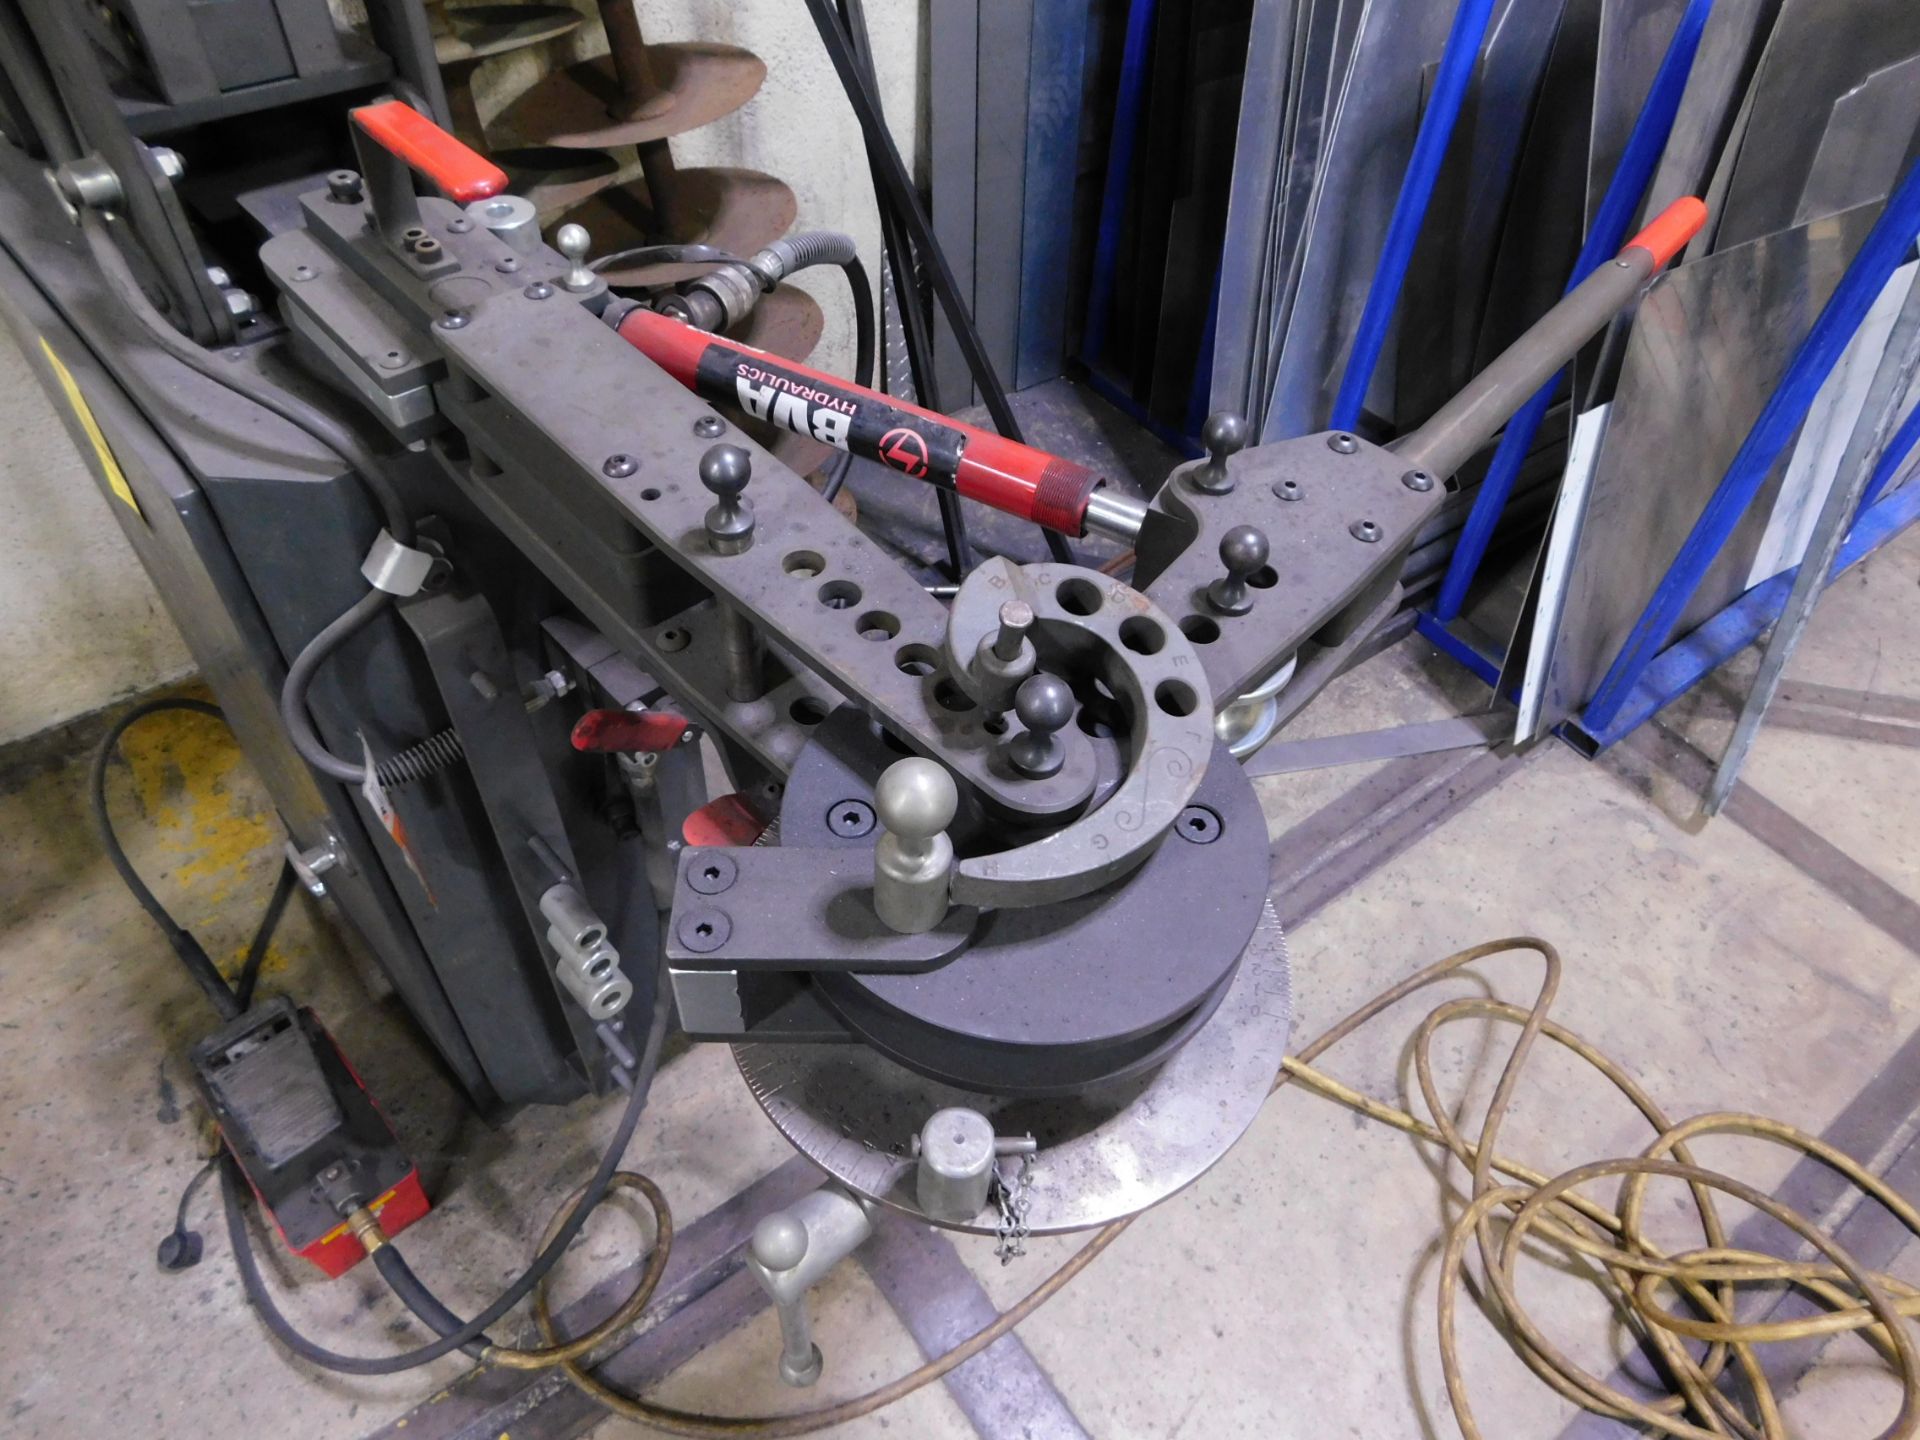 Universal Fabricator Model UF-25H Hydraulic Tubing Bender with 10" Press Brake Attachment, and - Image 2 of 7